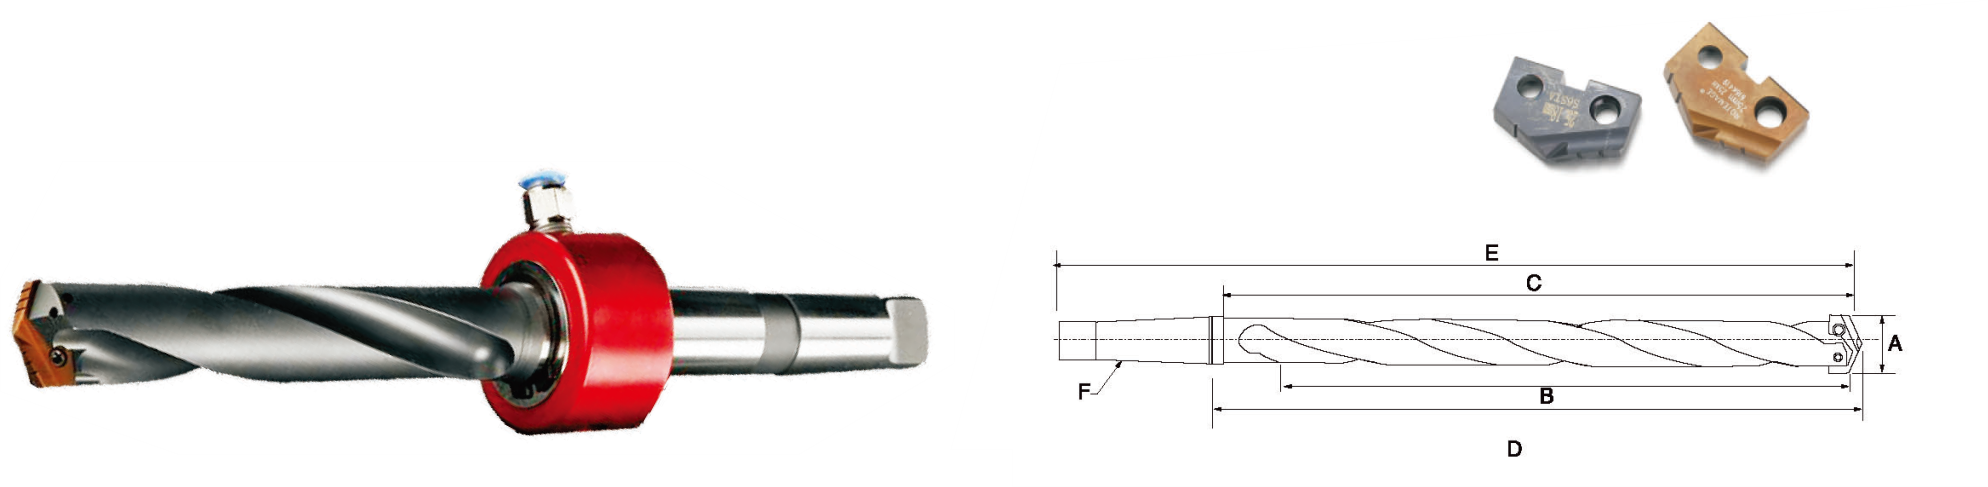 Helical drill with bevel handle